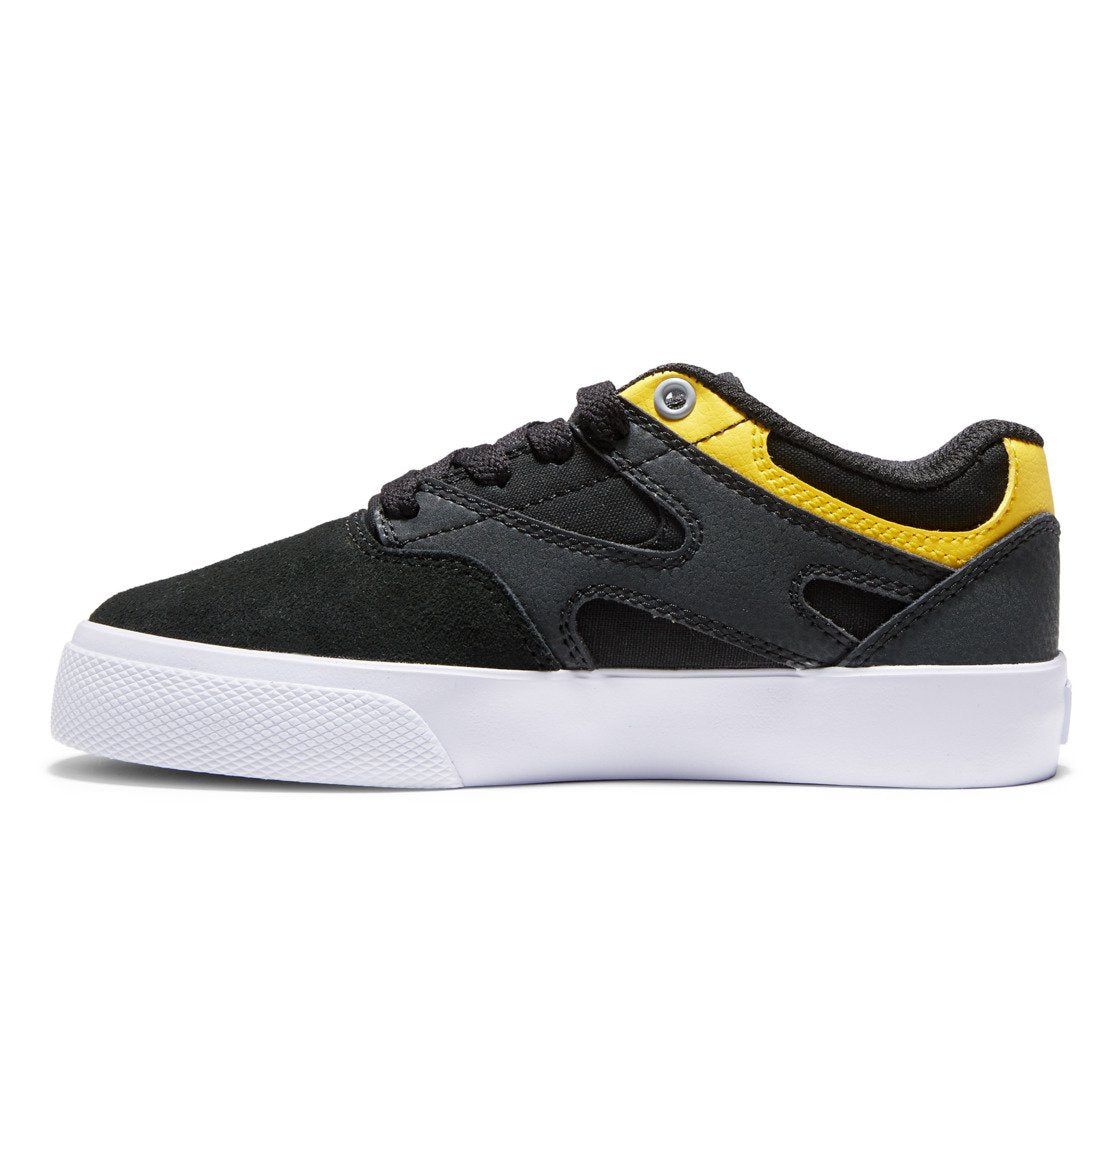 DC Kalis Vulc Shoes Youth Grey/Yellow Youth and Toddler Skate Shoes DC 